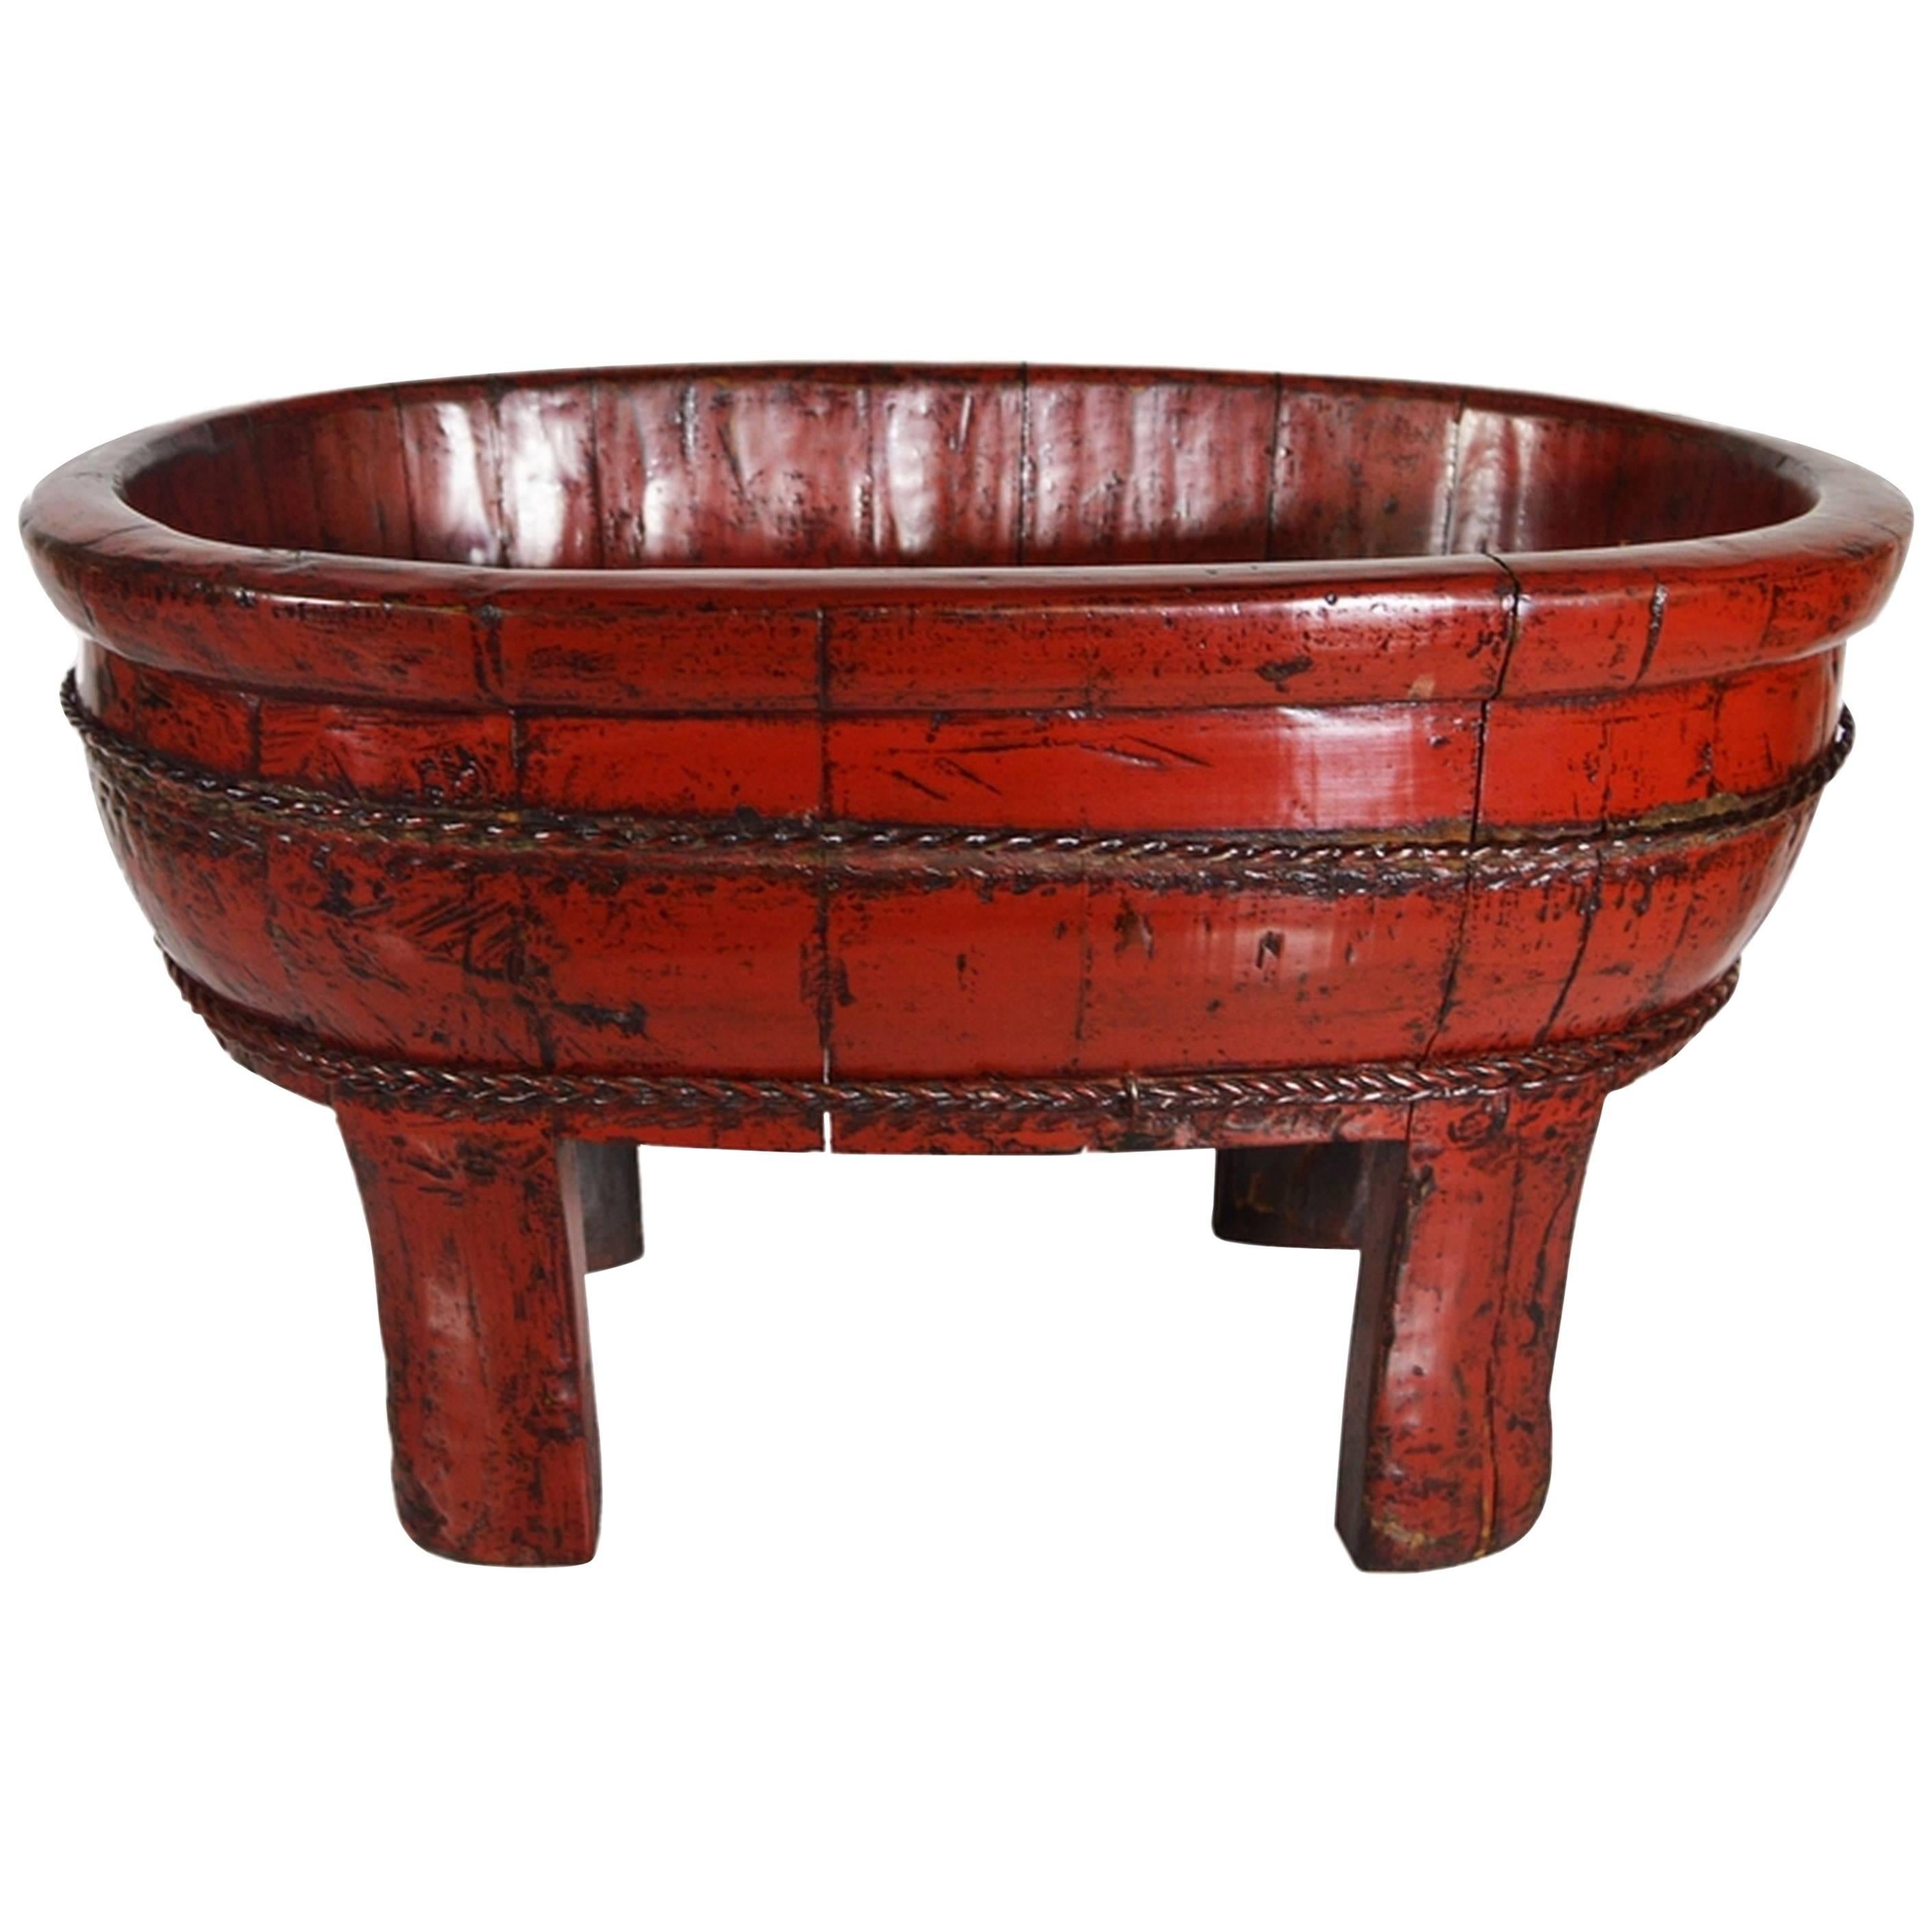 Antique Chinese 19th Century Red Lacquered Wood Bowl with Legs and Cords